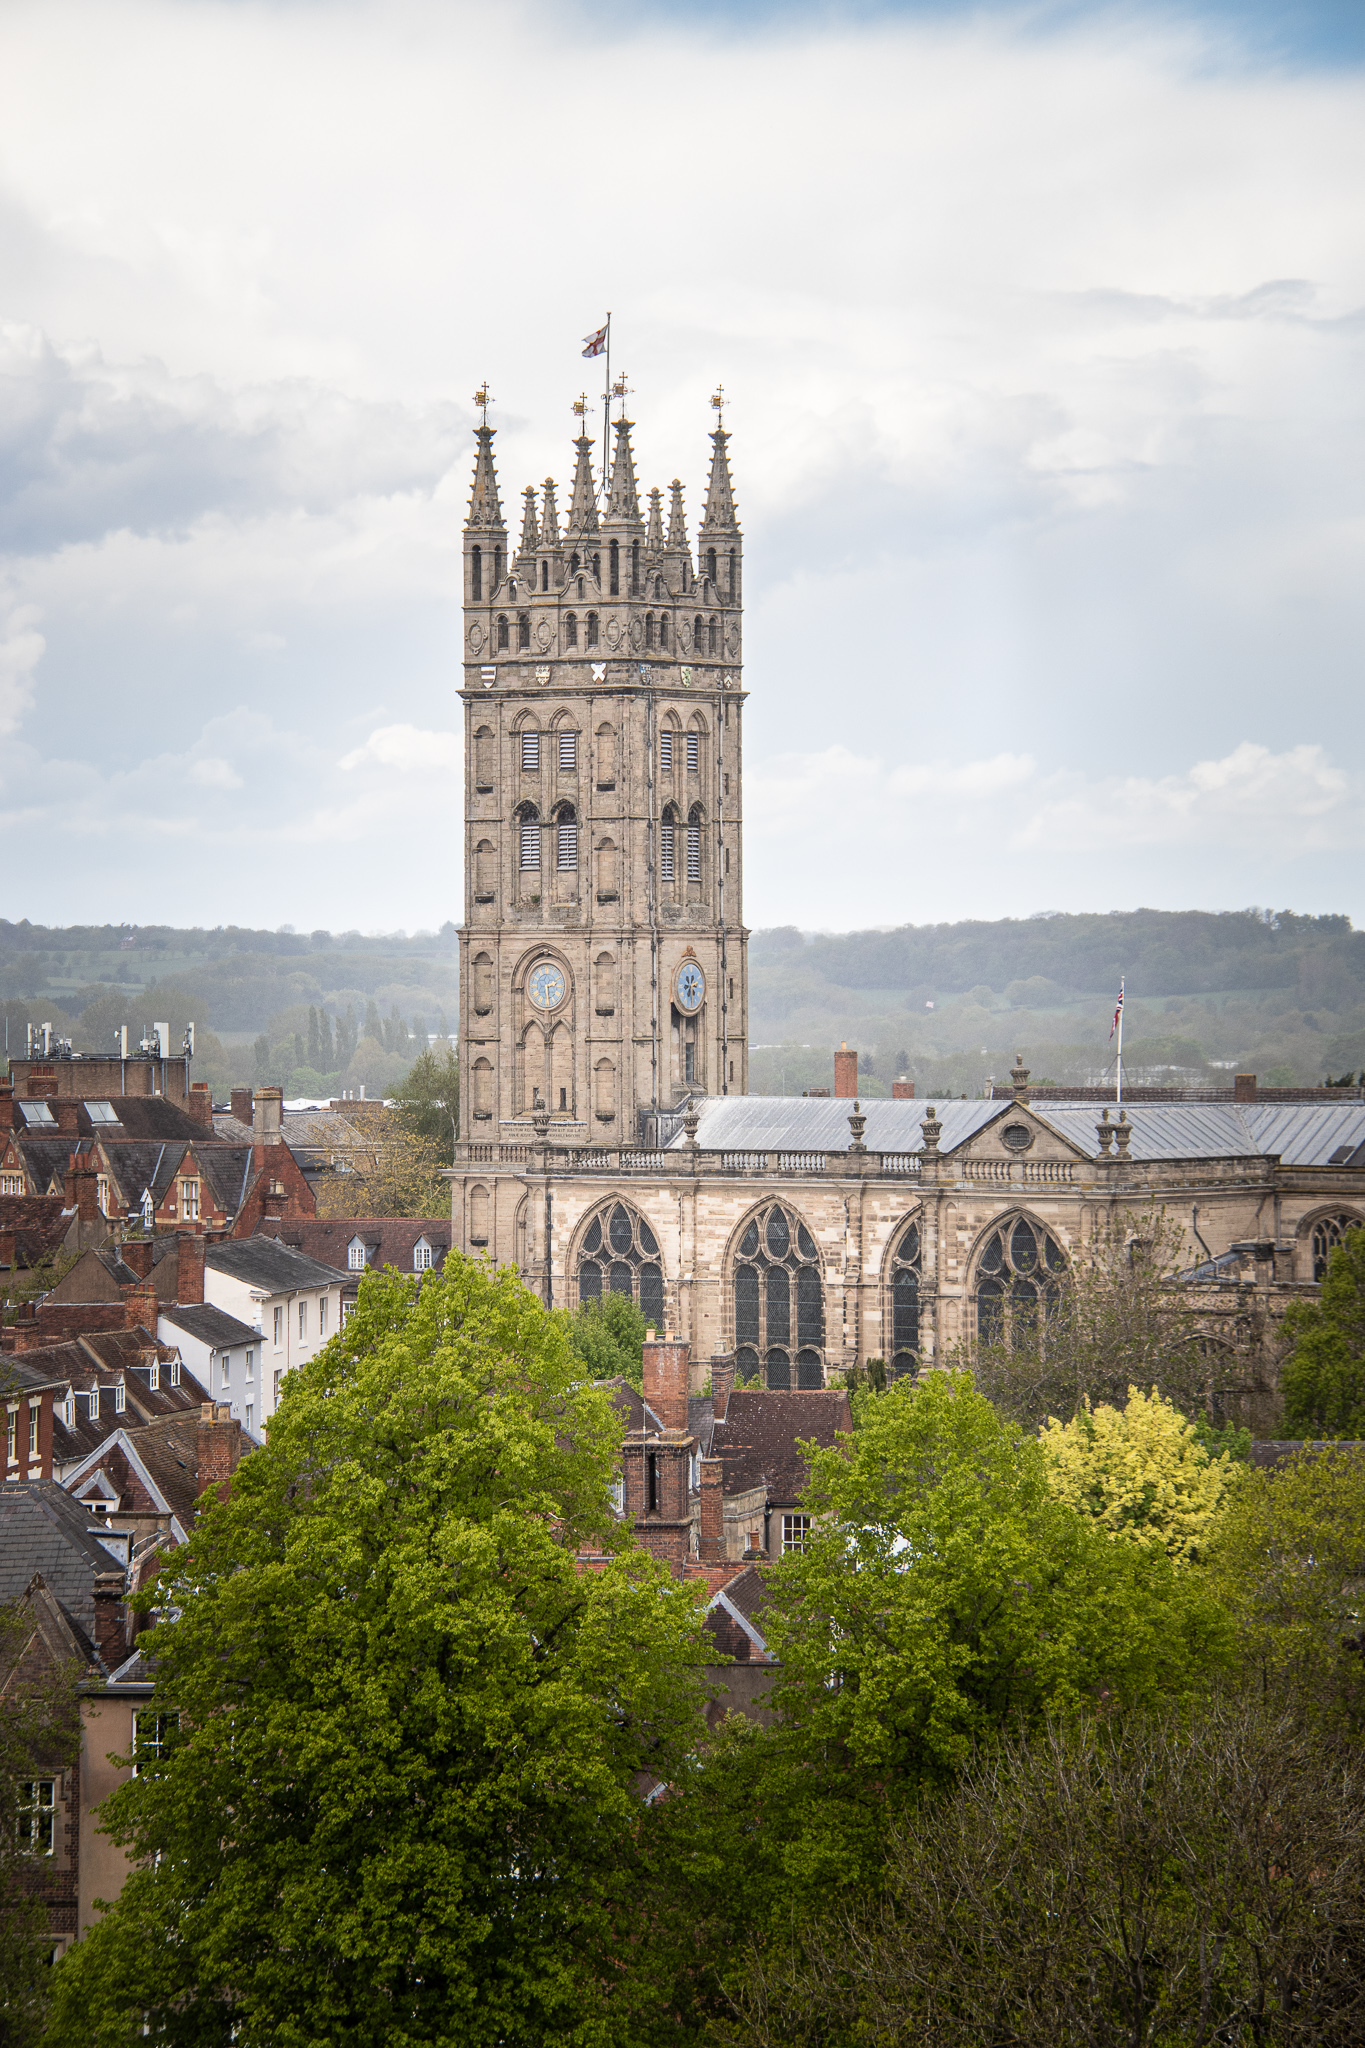 The Collegiate Church of St Mary's viewed from Guy's Tower at the Castle. 